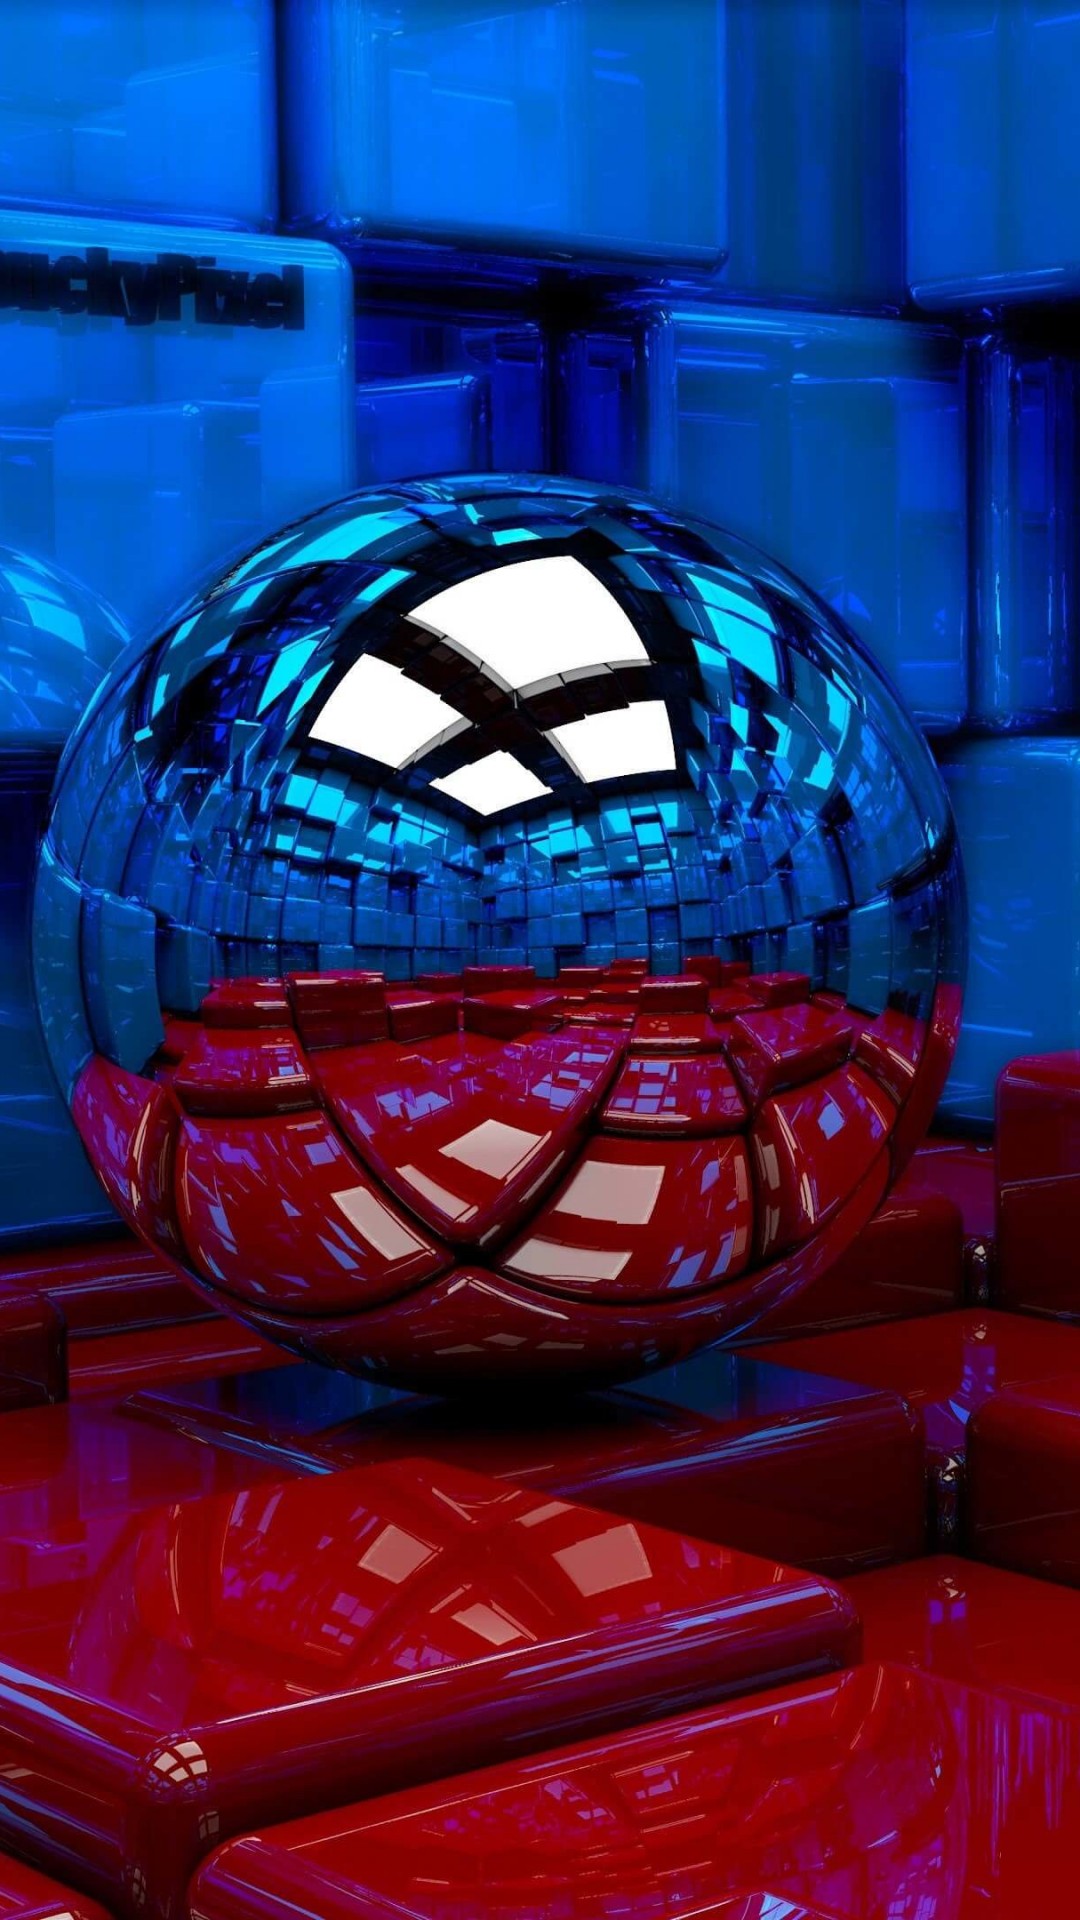 Metallic Sphere Reflecting The Cube Room Wallpaper for HTC One